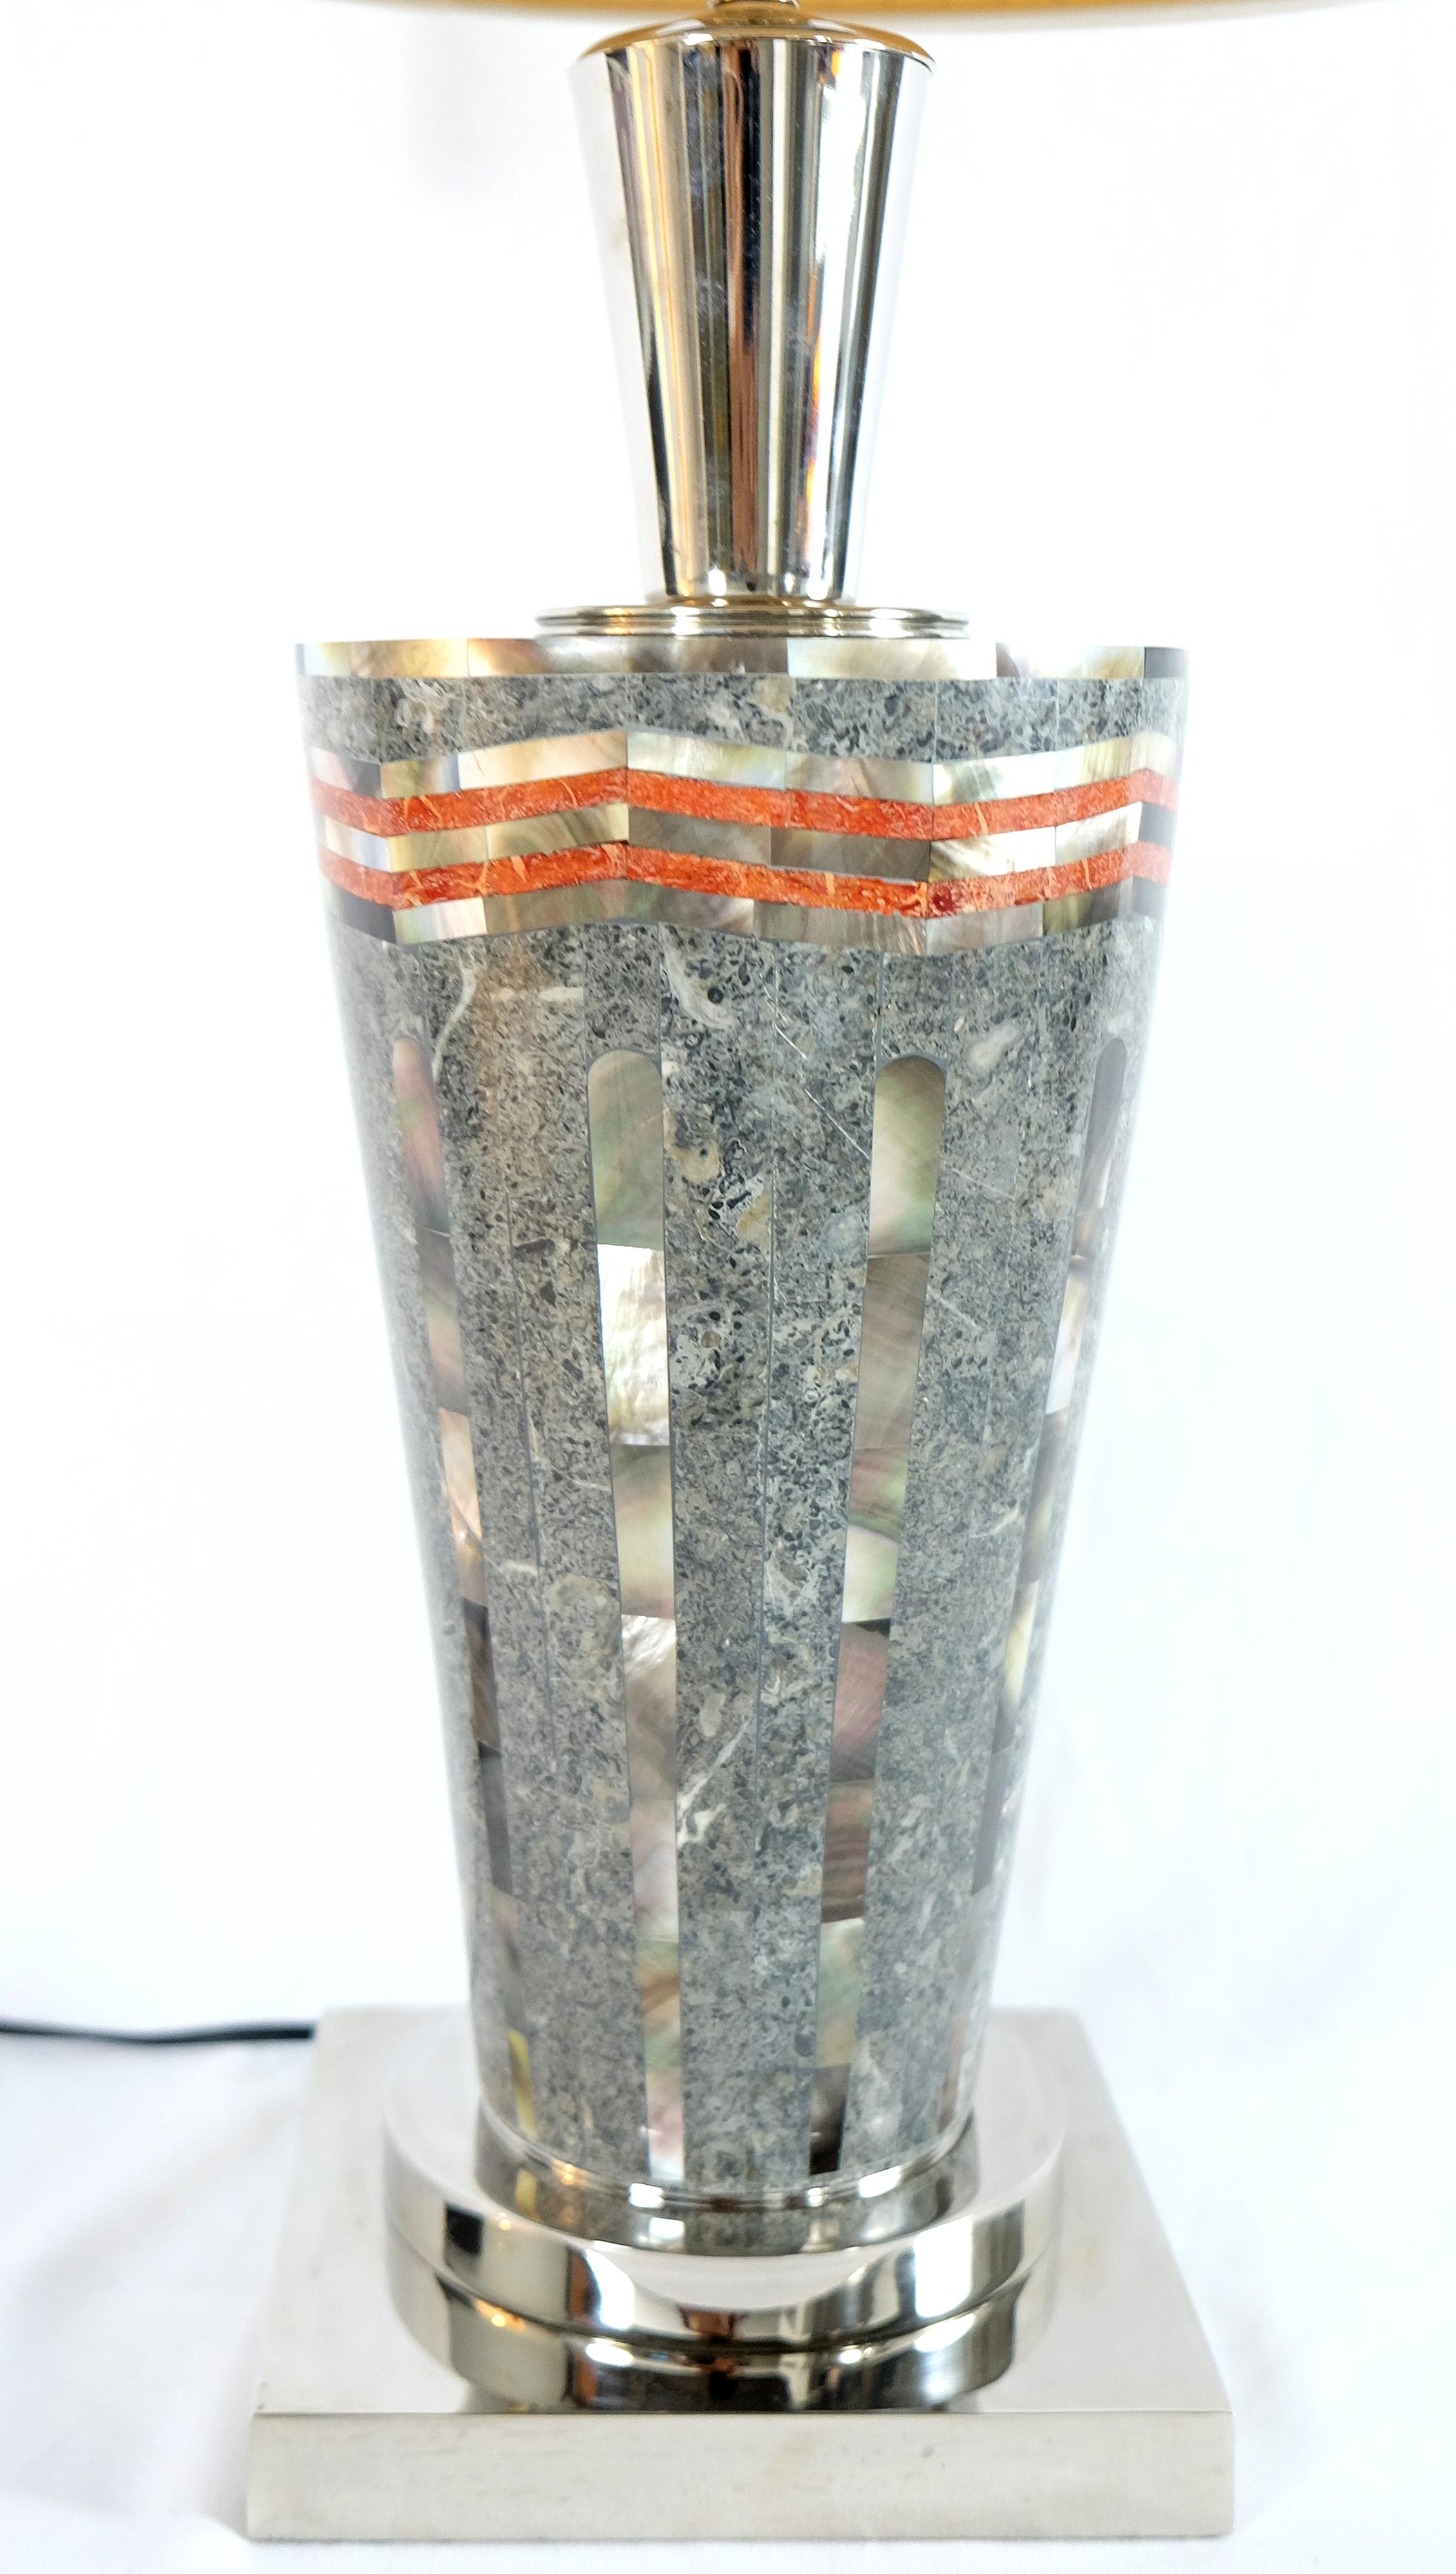 Laudarte Srl of Italy Table Lamp in Marble and Mother-Of Pearl 

Offered for sale is the Sintex Table Lamp with a sleek mosaic body of Mother-of-Pearl and stones from Ludarte Srl of Italy. The lamp is accented with brass details and completed with